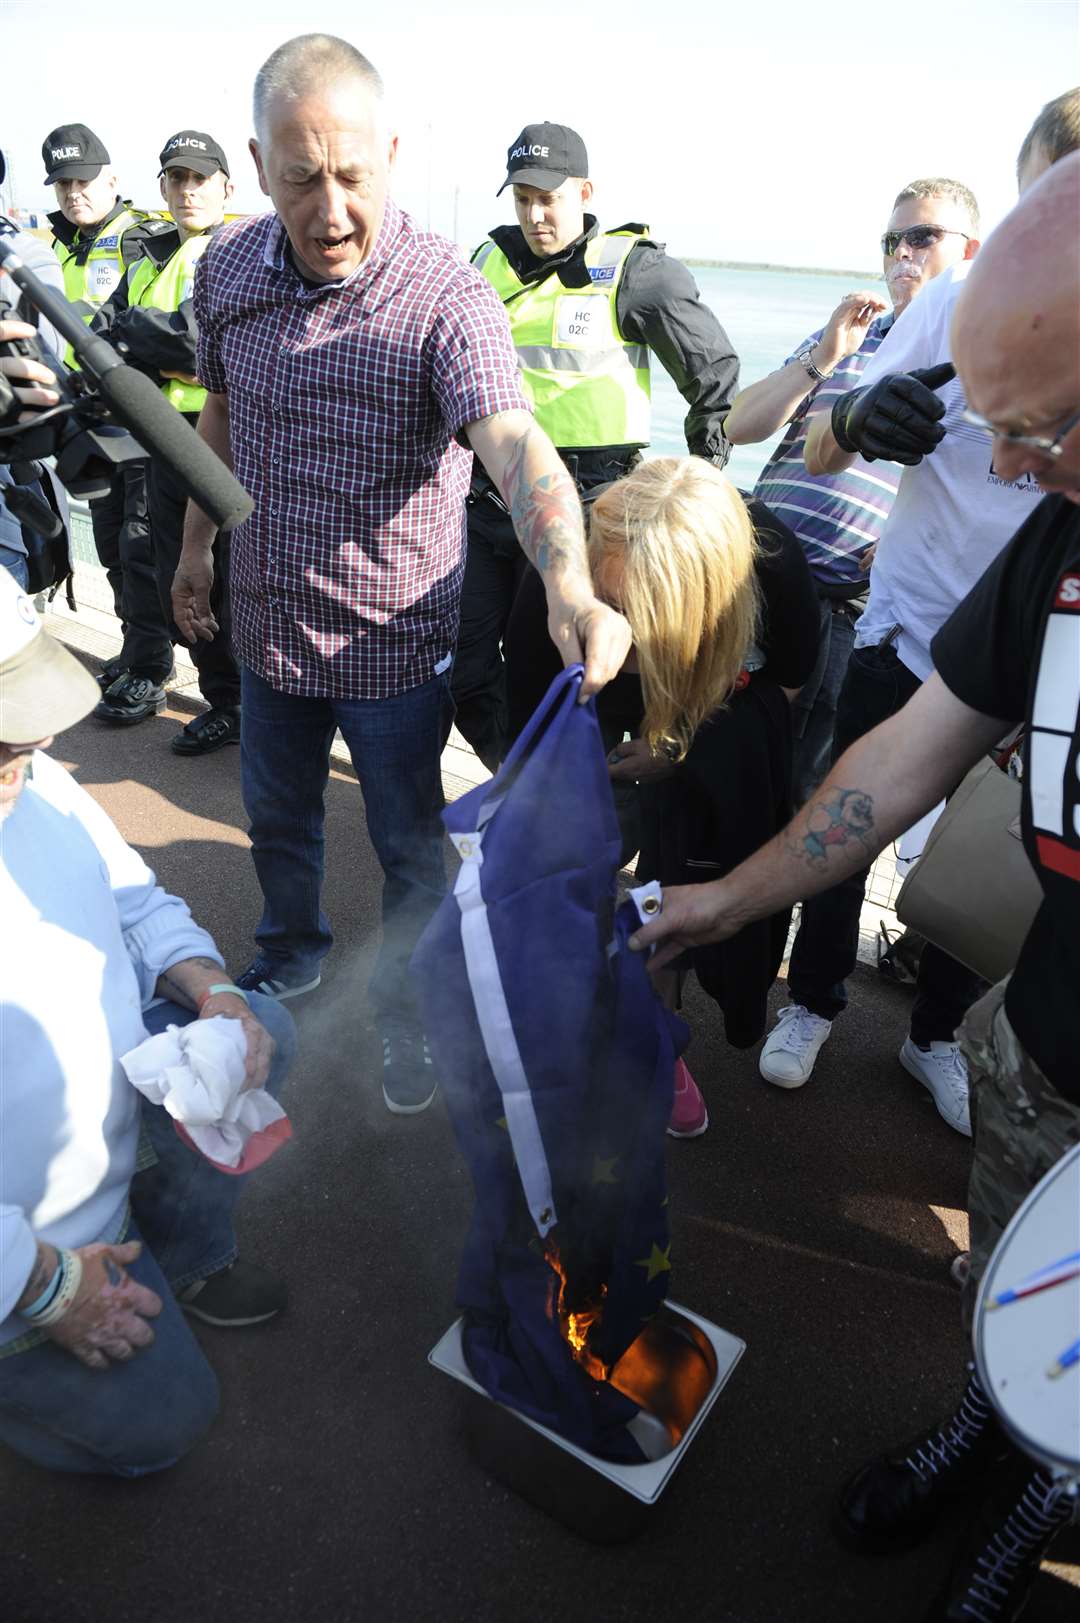 The right wing burned an EU flag during their speeches